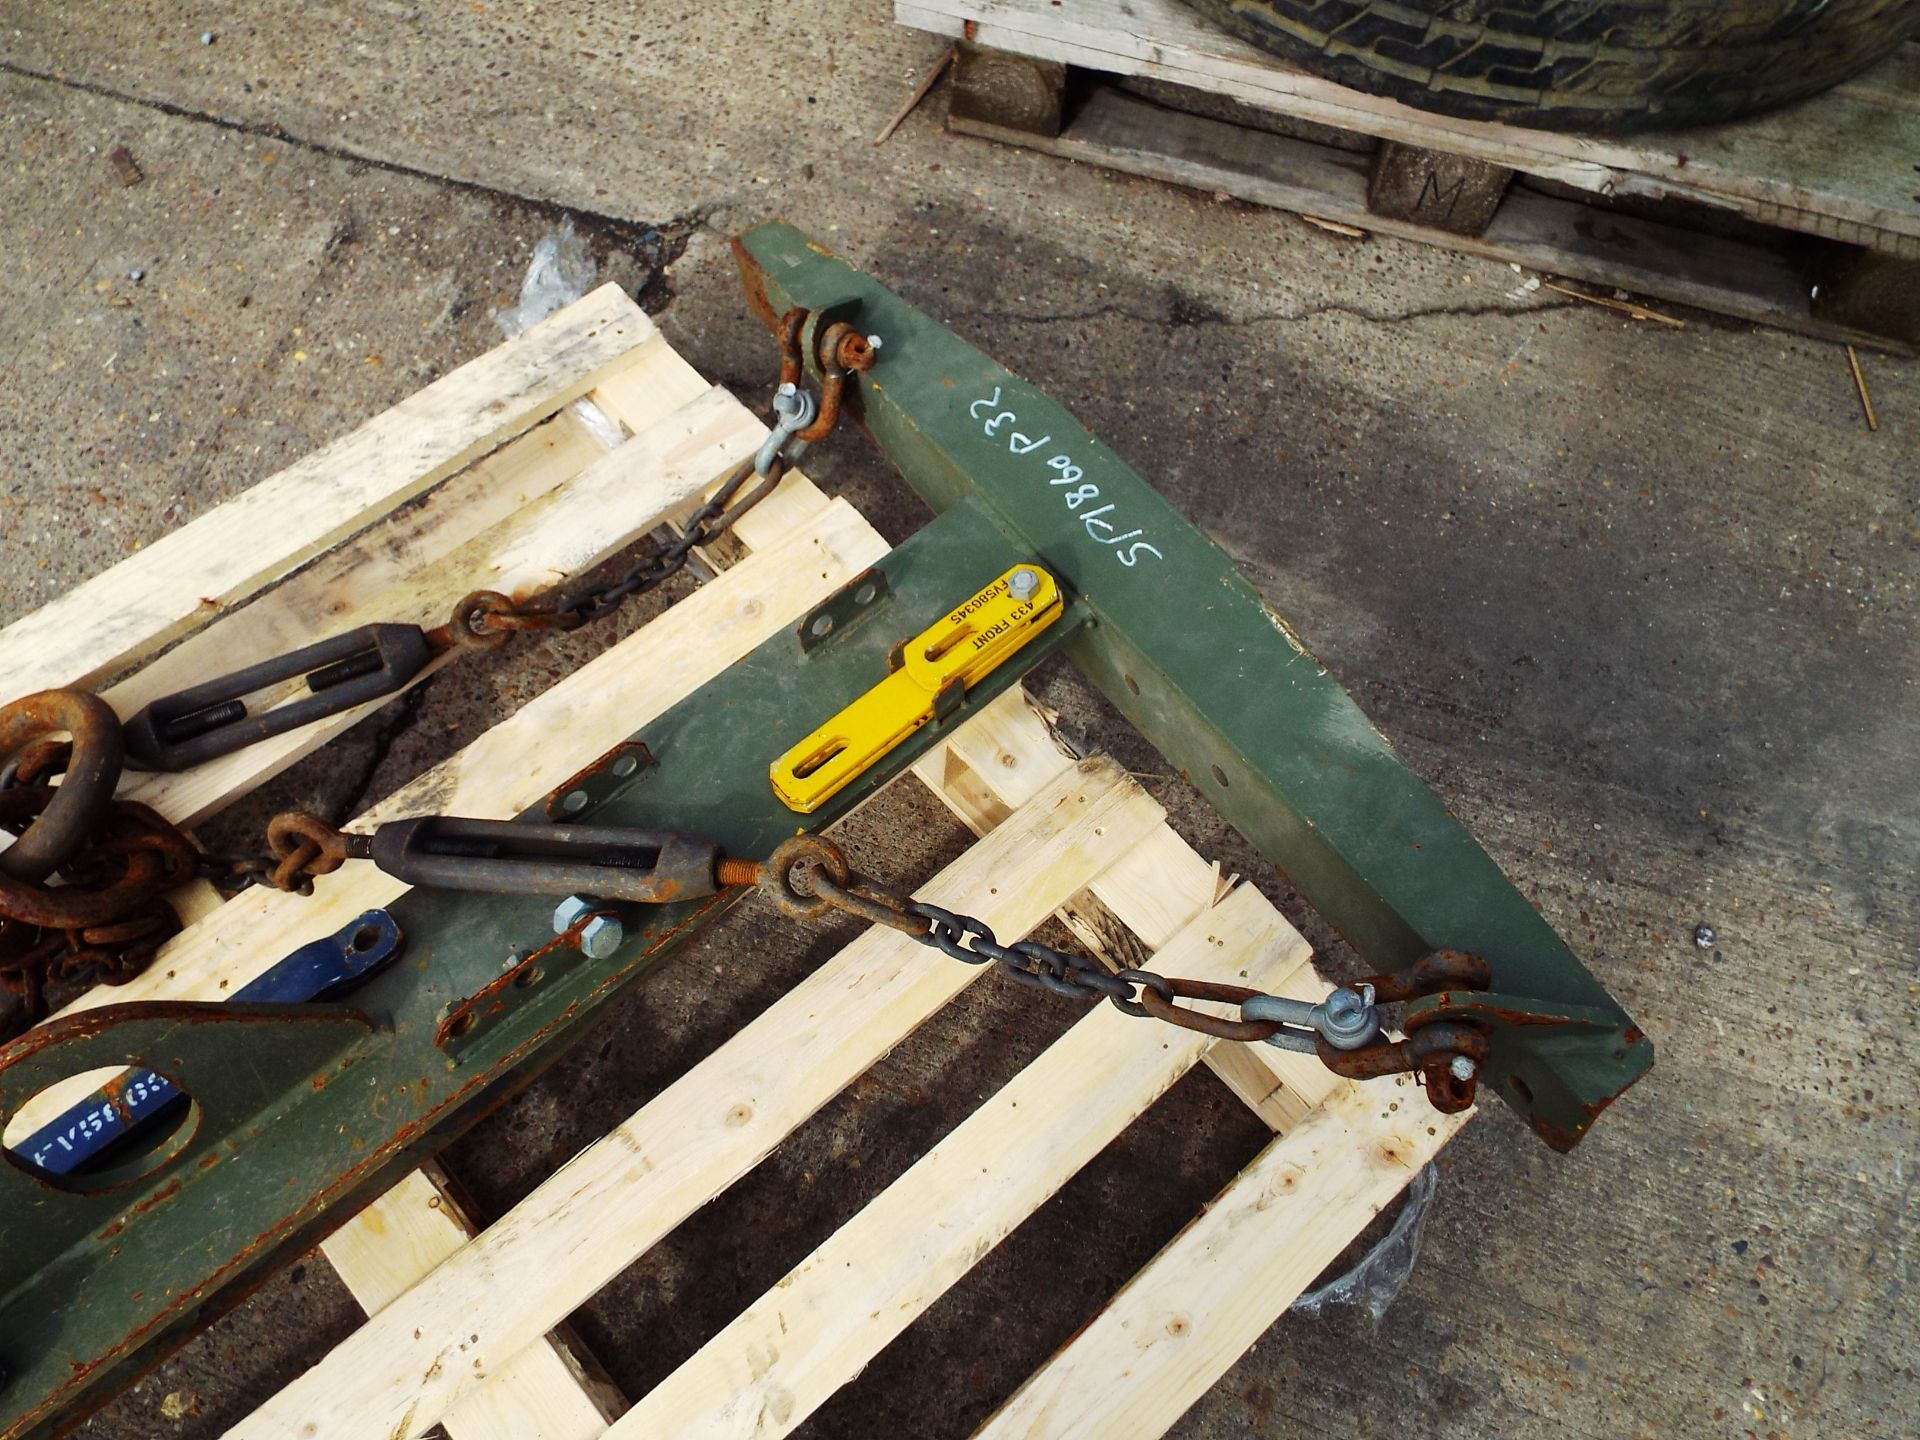 Extremely Rare Original FV432 Pack Lifting Frame with Attachments - Image 3 of 6